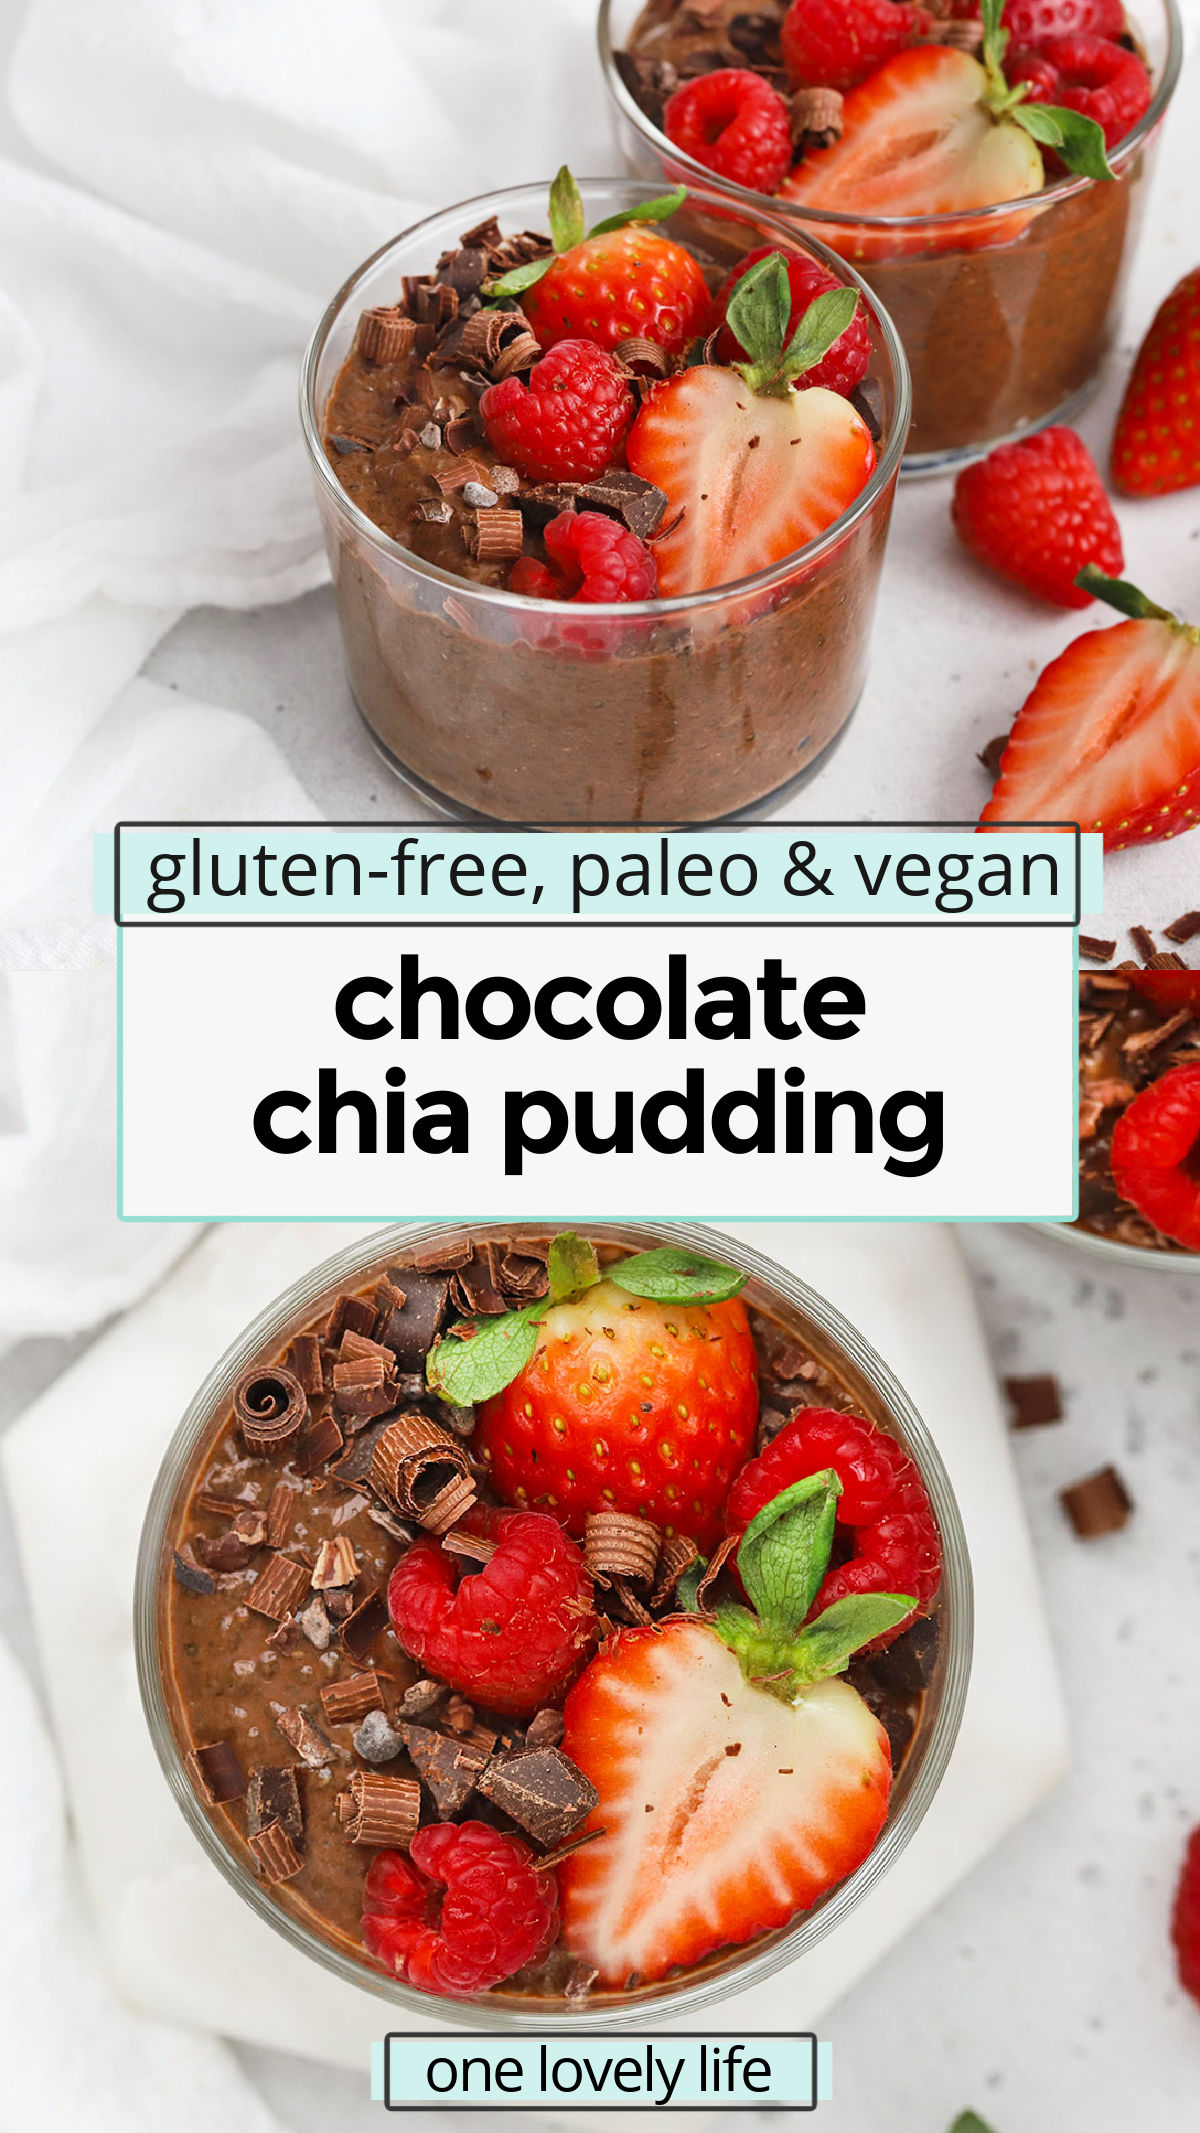 Chocolate Chia Pudding - This creamy vegan chocolate chia pudding makes a delicious healthier dessert or a decadent twist on breakfast. Serve it plain or try one of the yummy topping ideas in the post! (Vegan & Paleo) // Chocolate chia pudding recipe // healthy chocolate pudding // healthy chocolate chia pudding // vegan chocolate pudding // paleo chocolate pudding // healthy pudding // healthy dessert recipe // vegan dessert // paleo dessert // healthy Valentine's day dessert